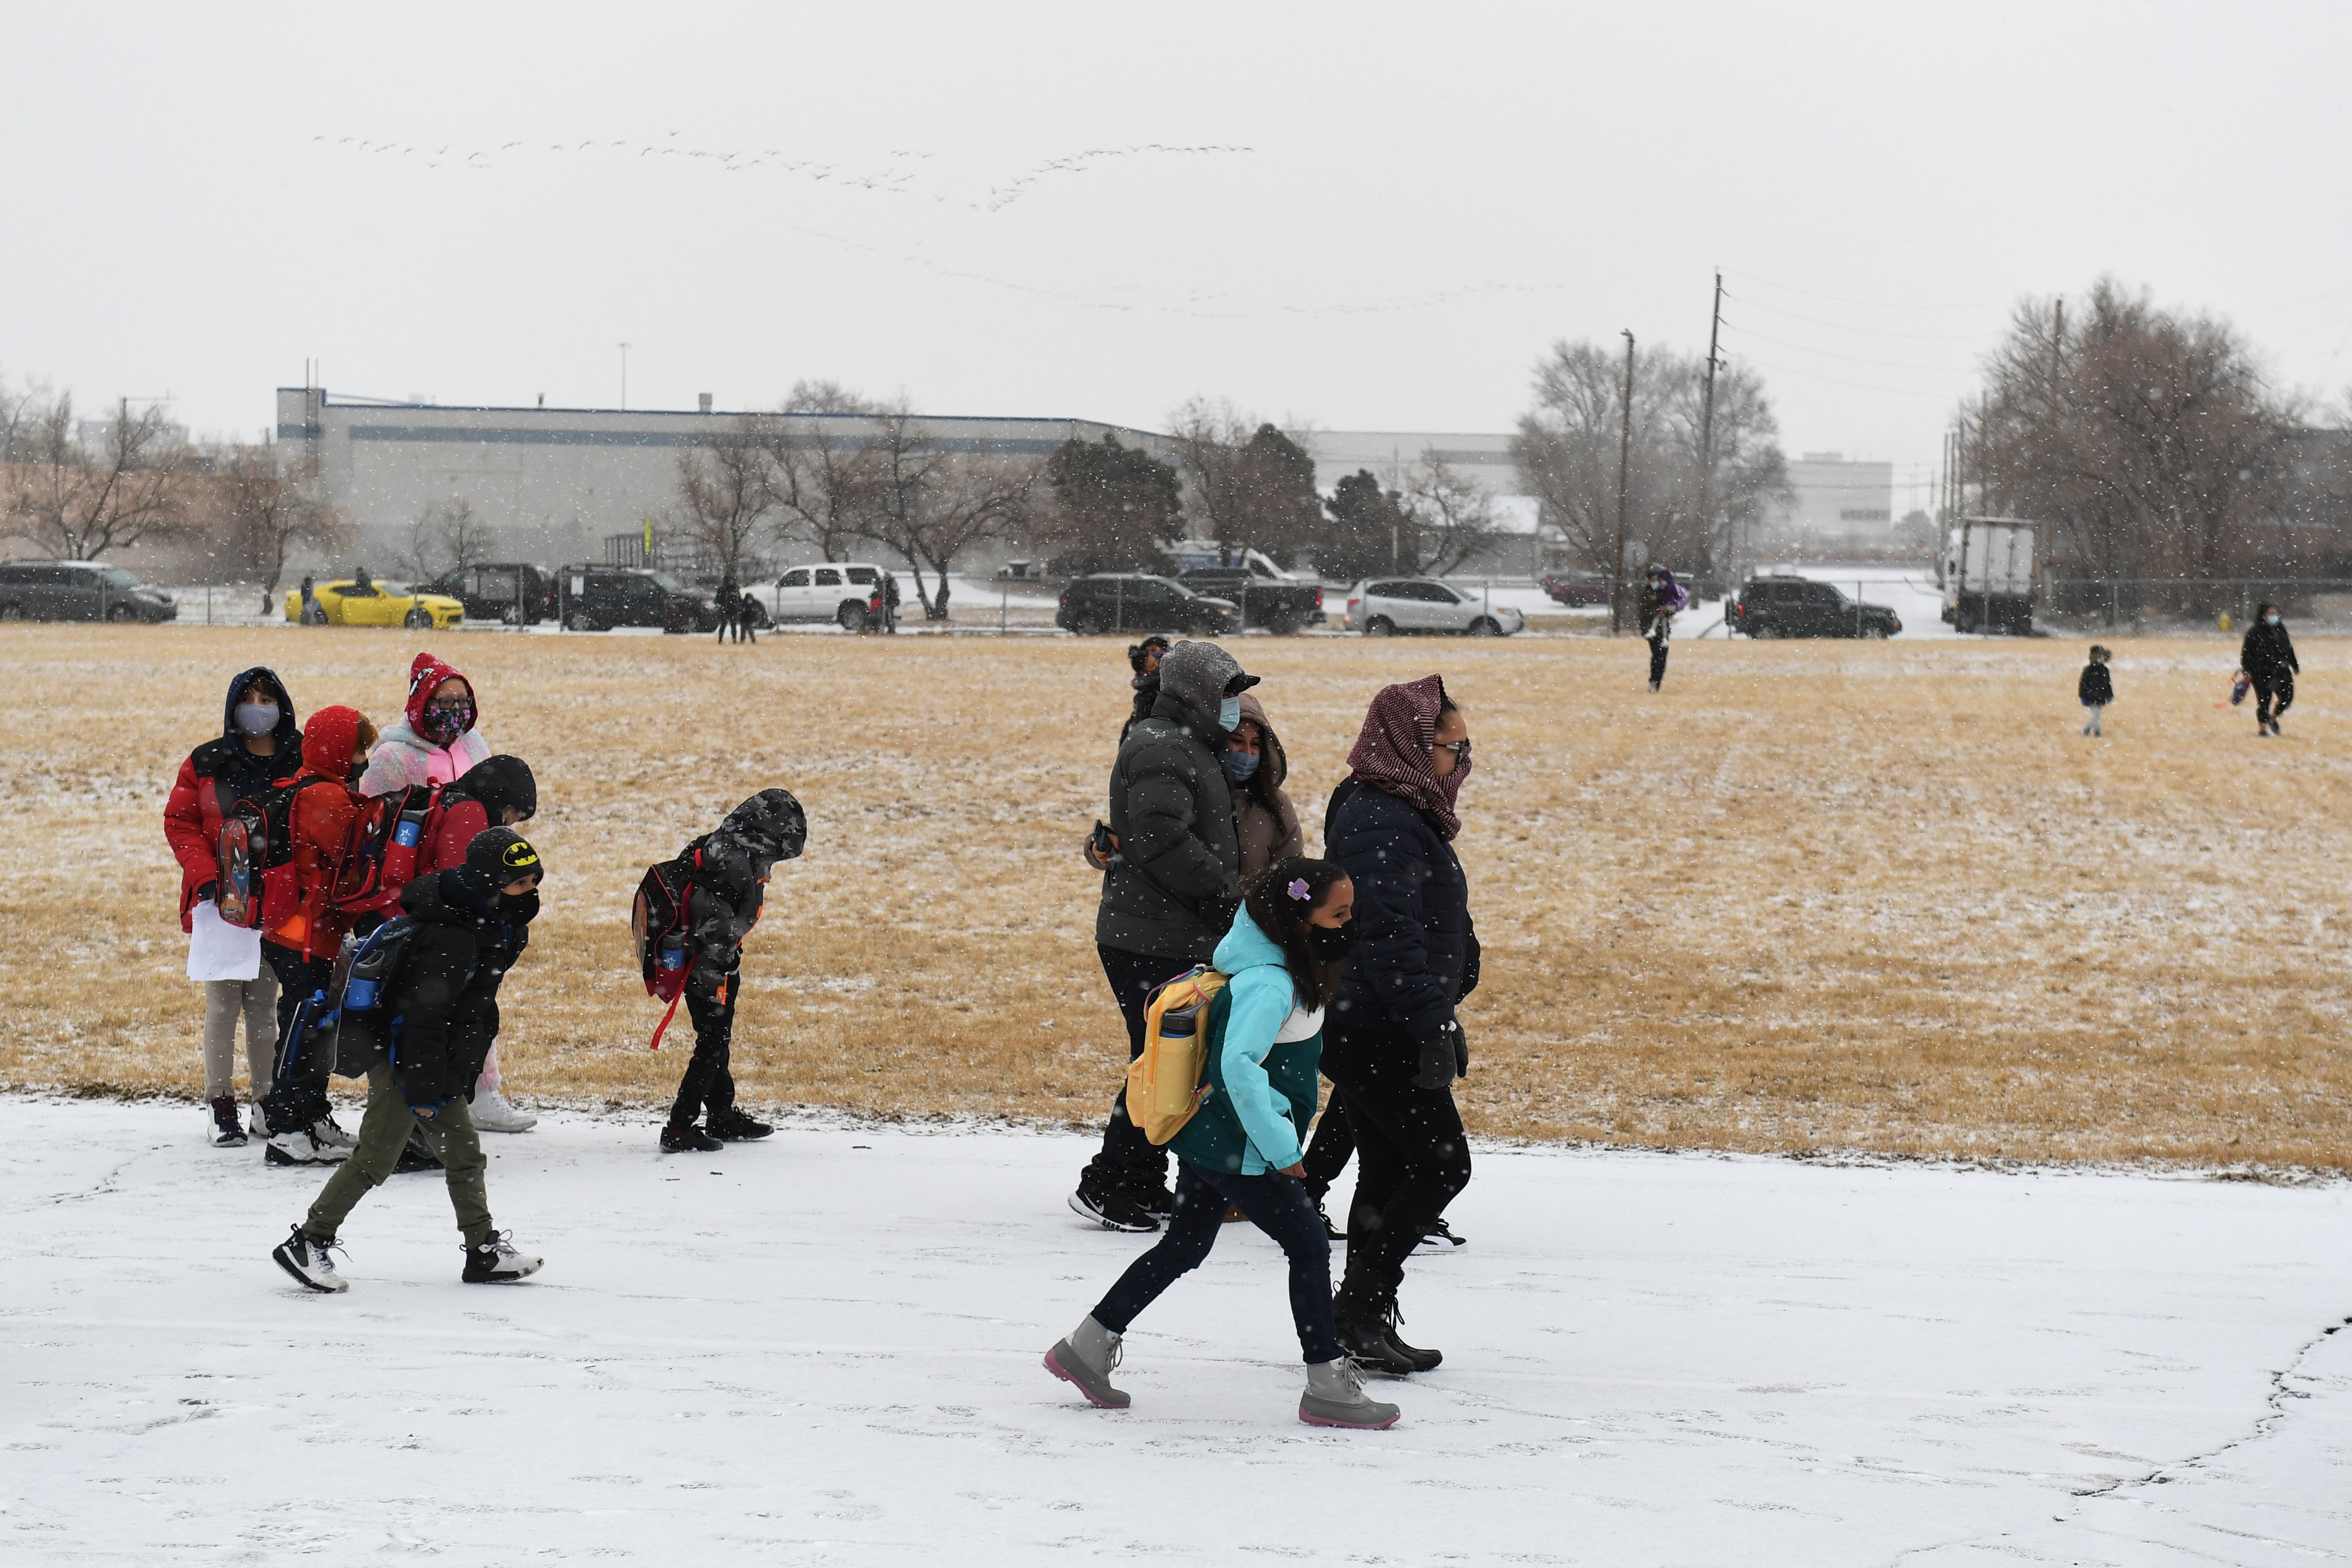 Children and parents wearing masks walk to school across a snowy field.